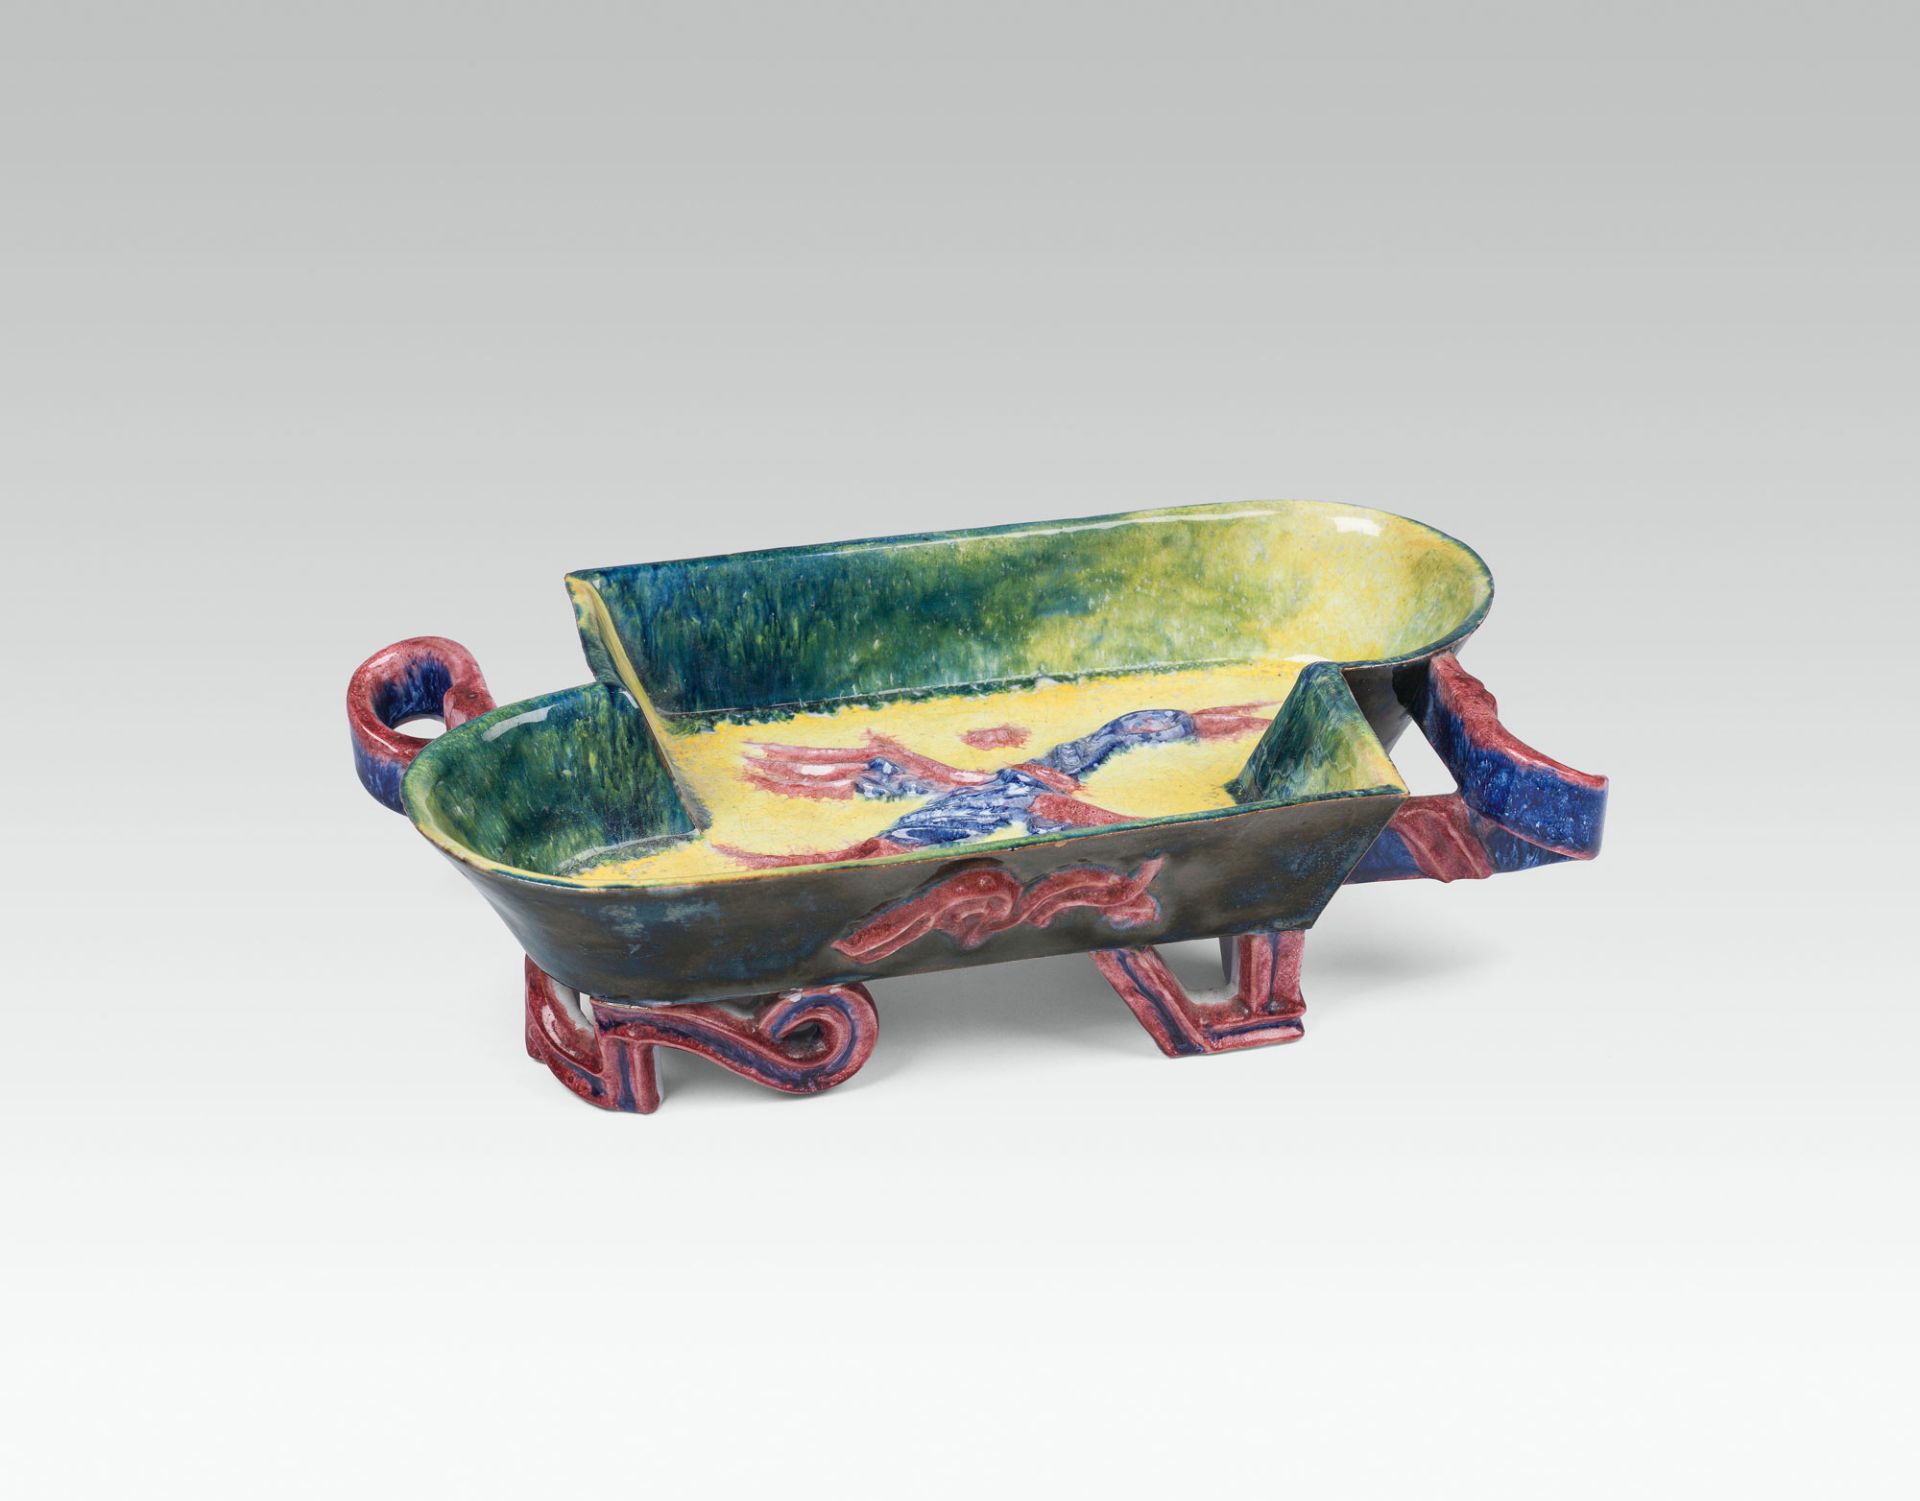 Vally WieselthierCenterpiececeramics, redbrown shard, colourfully painted and glazed; marked on